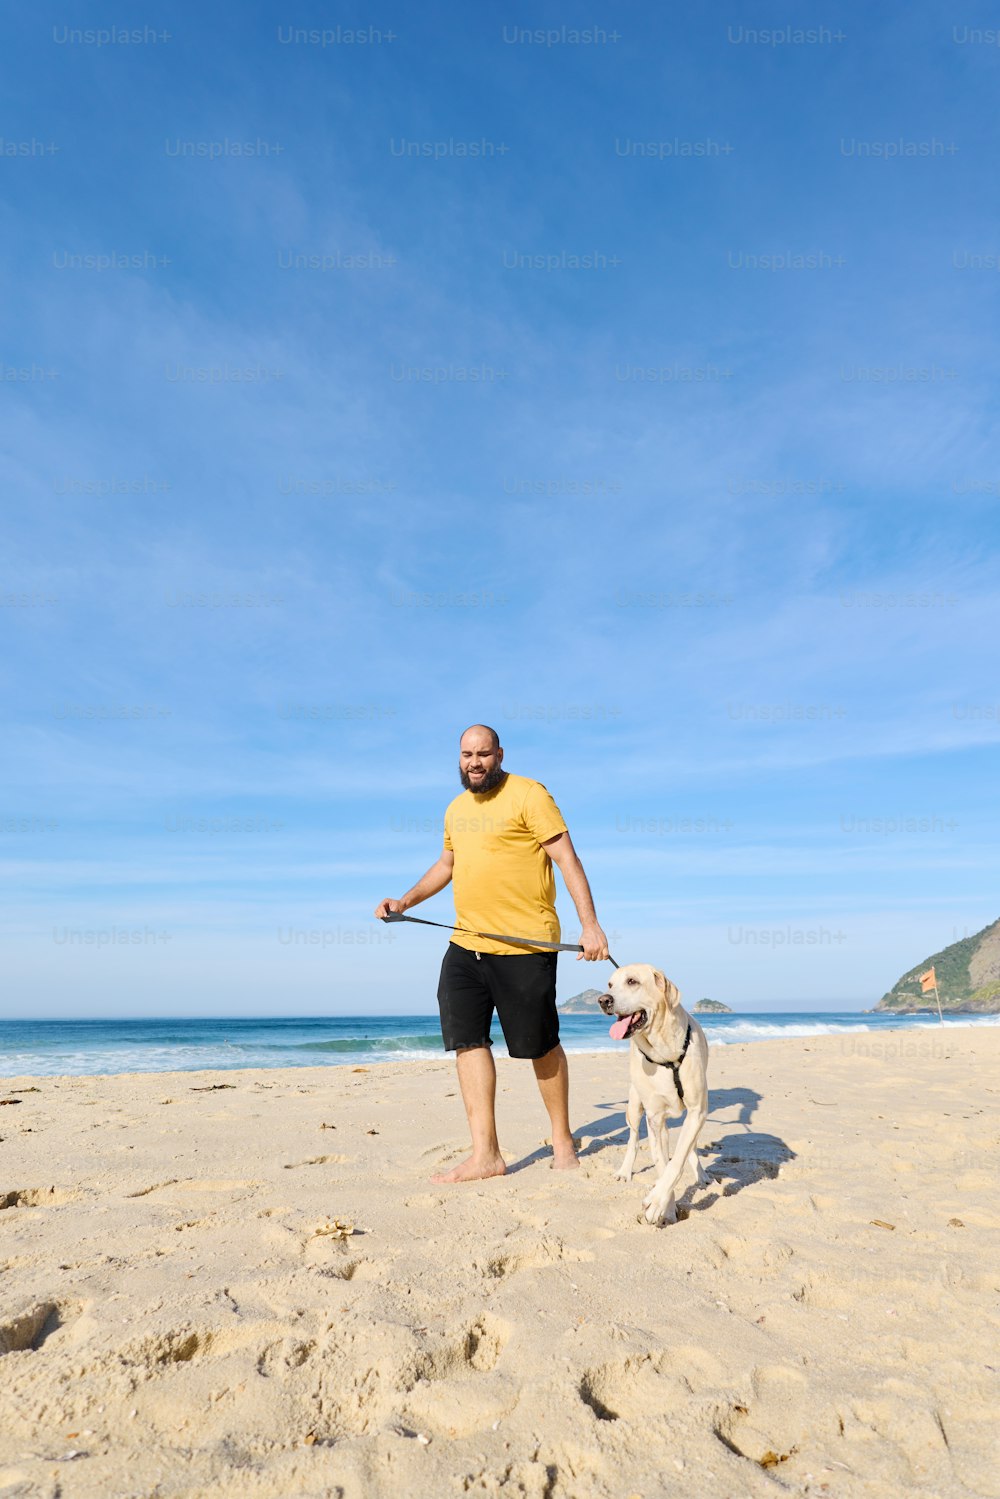 a man standing on a beach with a dog